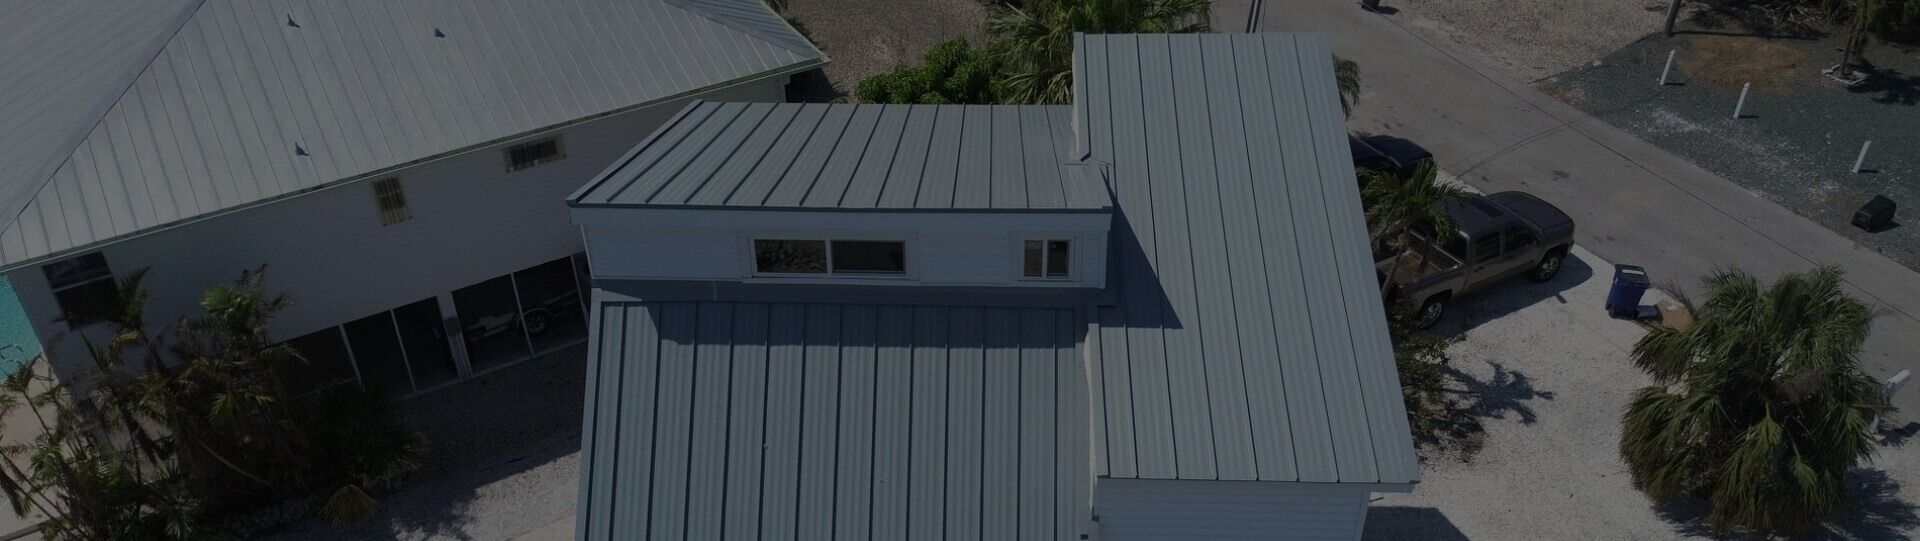 Multi level metal roof installed by Cathedral Roofing. Photo taken by drone.